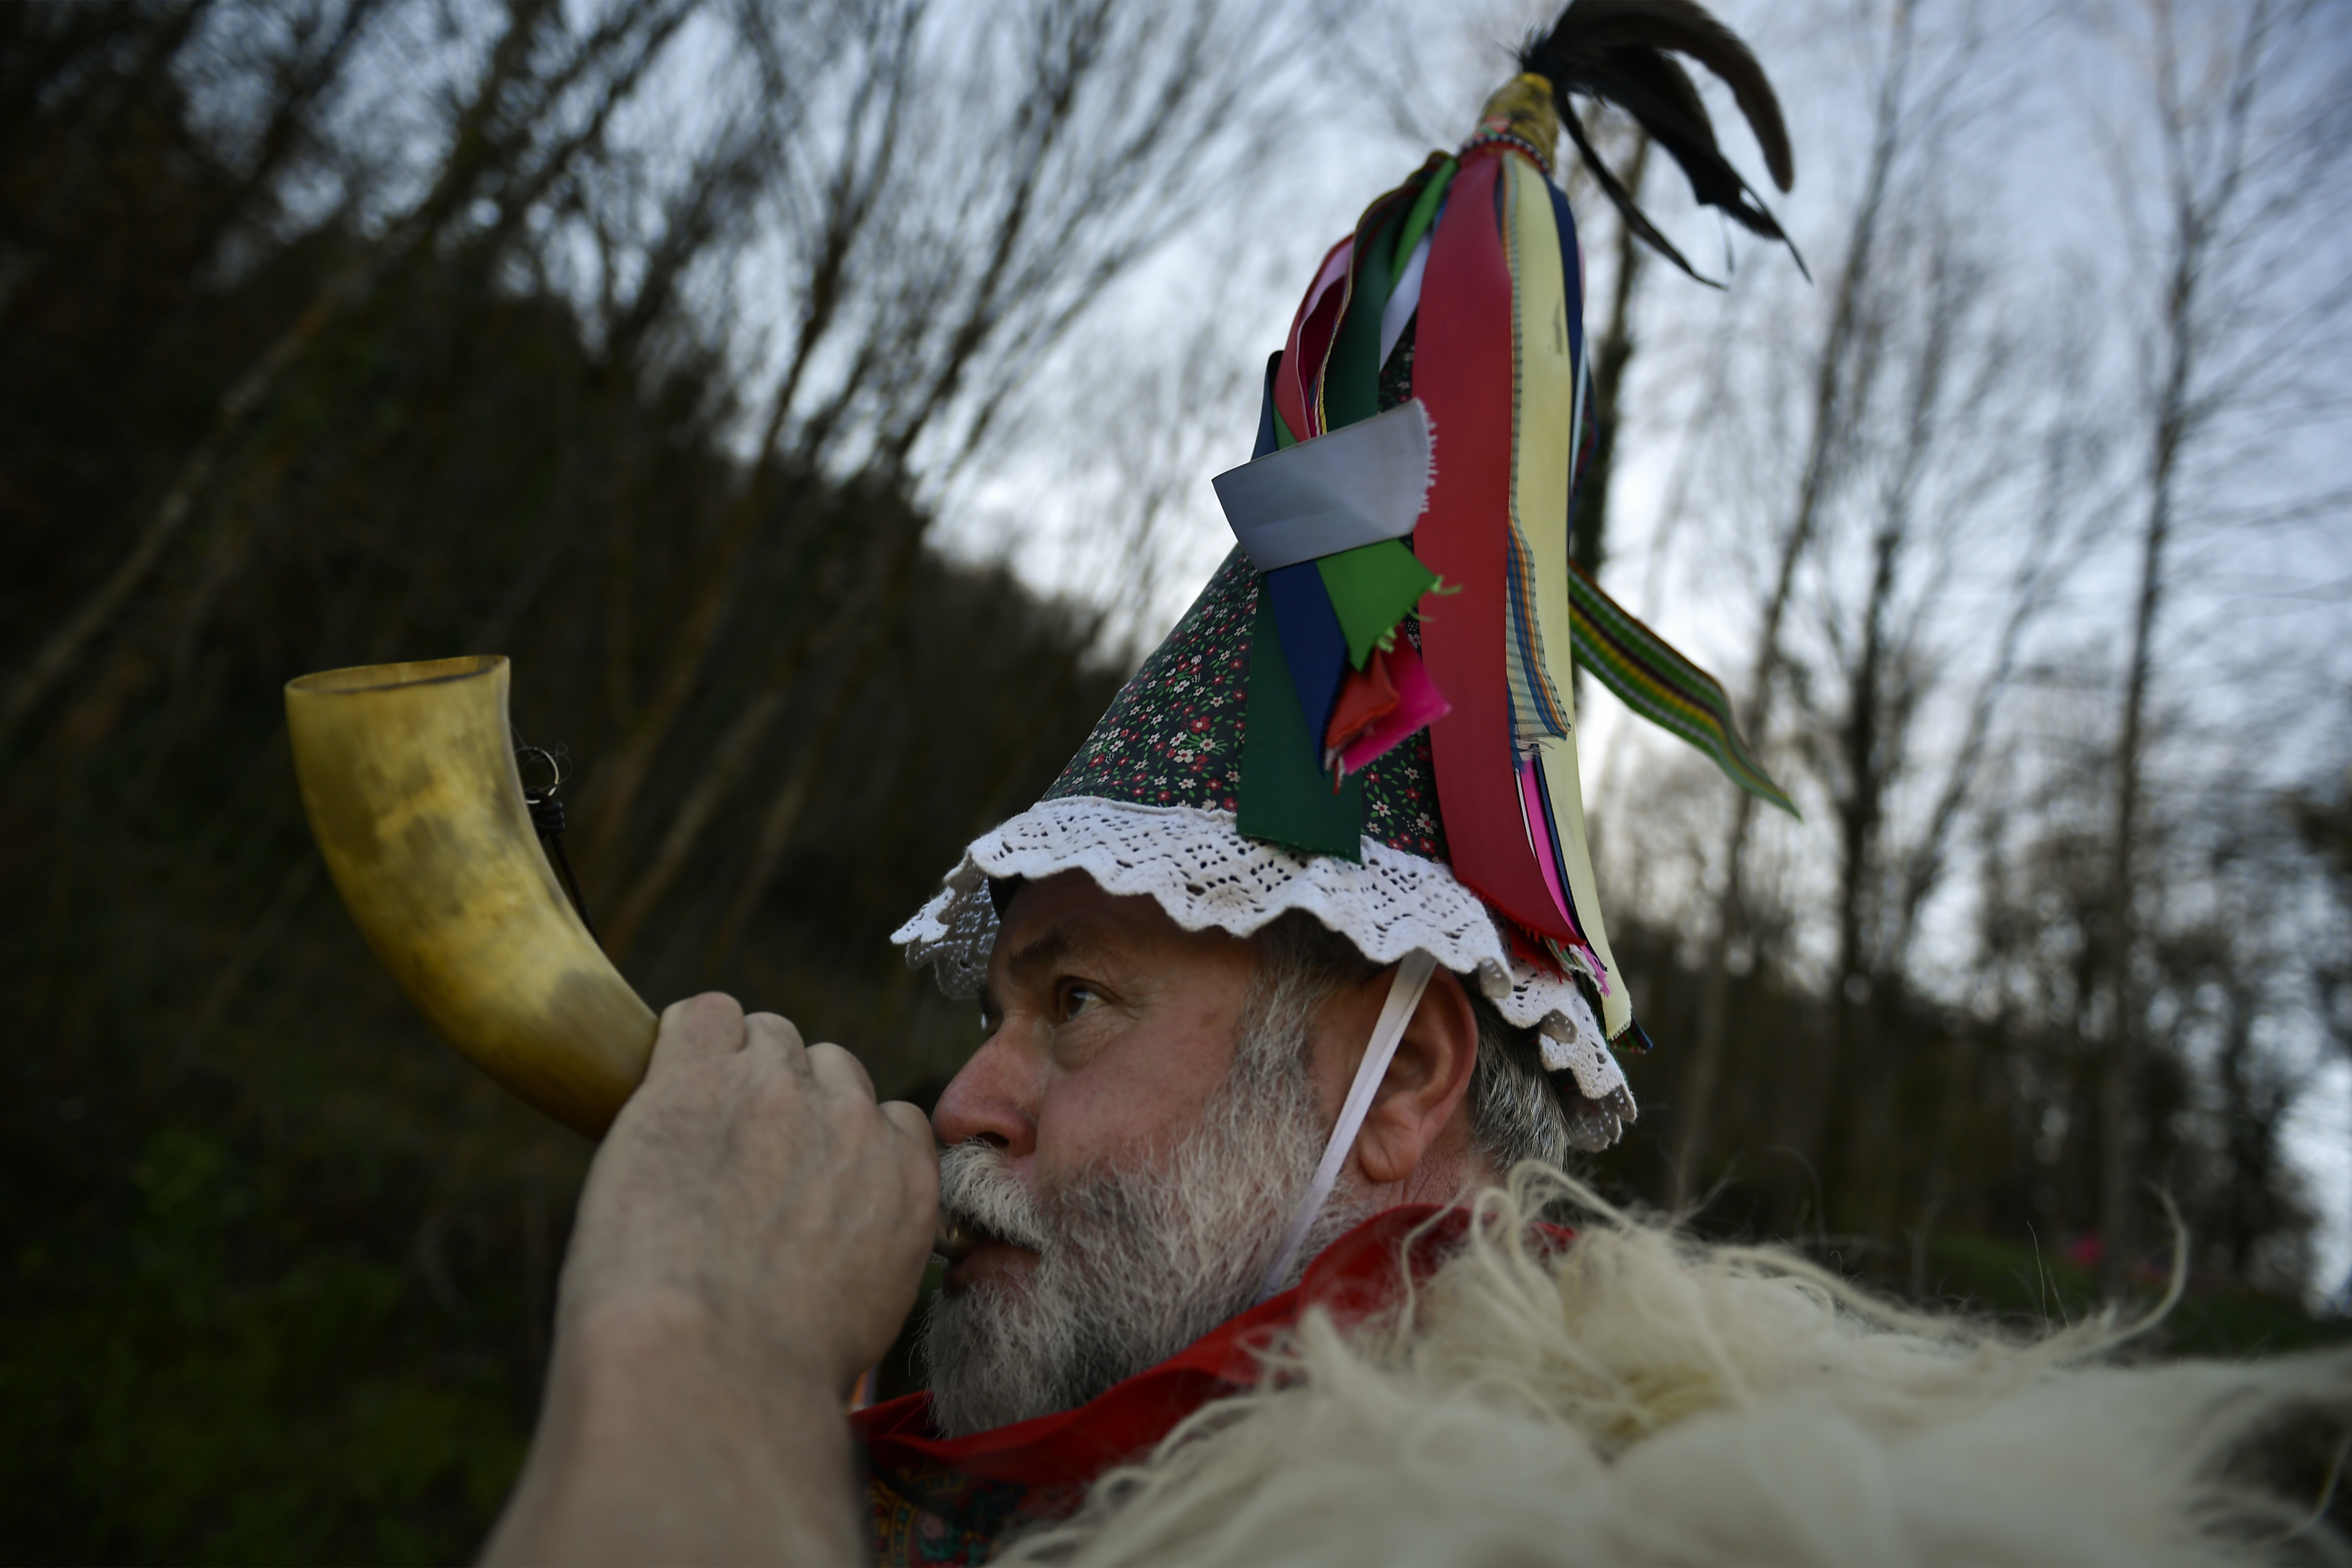 A Joaldunak called Zanpantzar, plays a horn taking part in the Carnival between the Pyrenees villages of Ituren and Zubieta, northern Spain, Monday, Jan. 29, 2018. In one of the most ancient carnivals in Europe, dating from before the Roman empire, companies of Joaldunak (cowbells) made up of residents of two towns, Ituren and Zubieta, parade the streets costumed in sandals, lace petticoats, sheepskins around the waist and shoulders, coloured neckerchiefs, conical caps with ribbons and a hyssop of horsehair in their right hands and cowbells hung across their lower back. (AP Photo/Alvaro Barrientos)